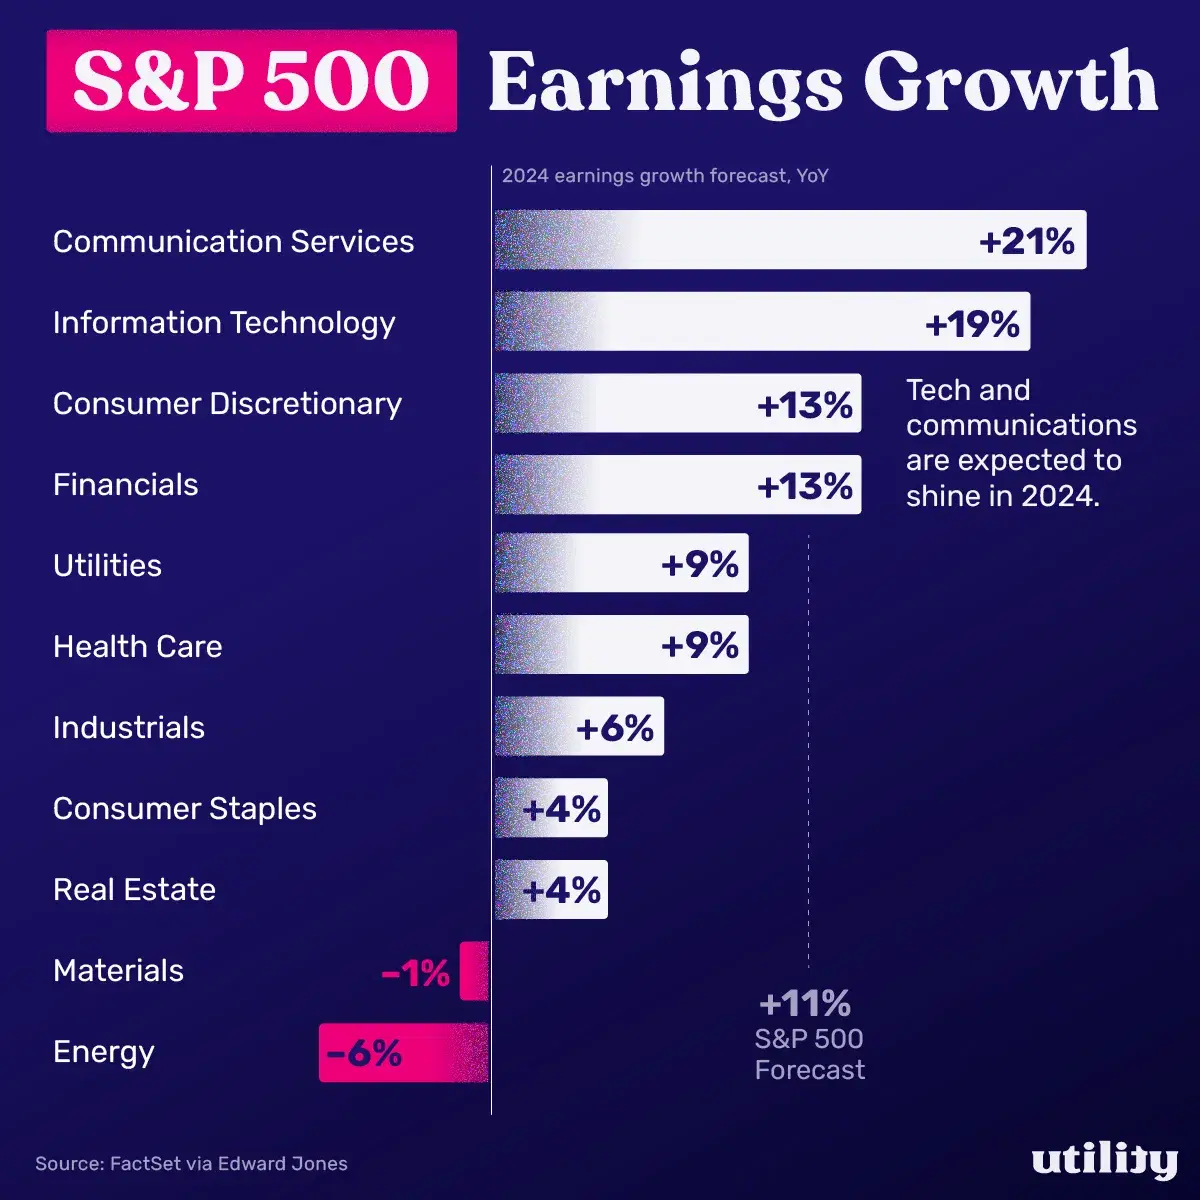 S&P 500 Expected to Grow Earnings by 11% Year-Over-Year in 2024